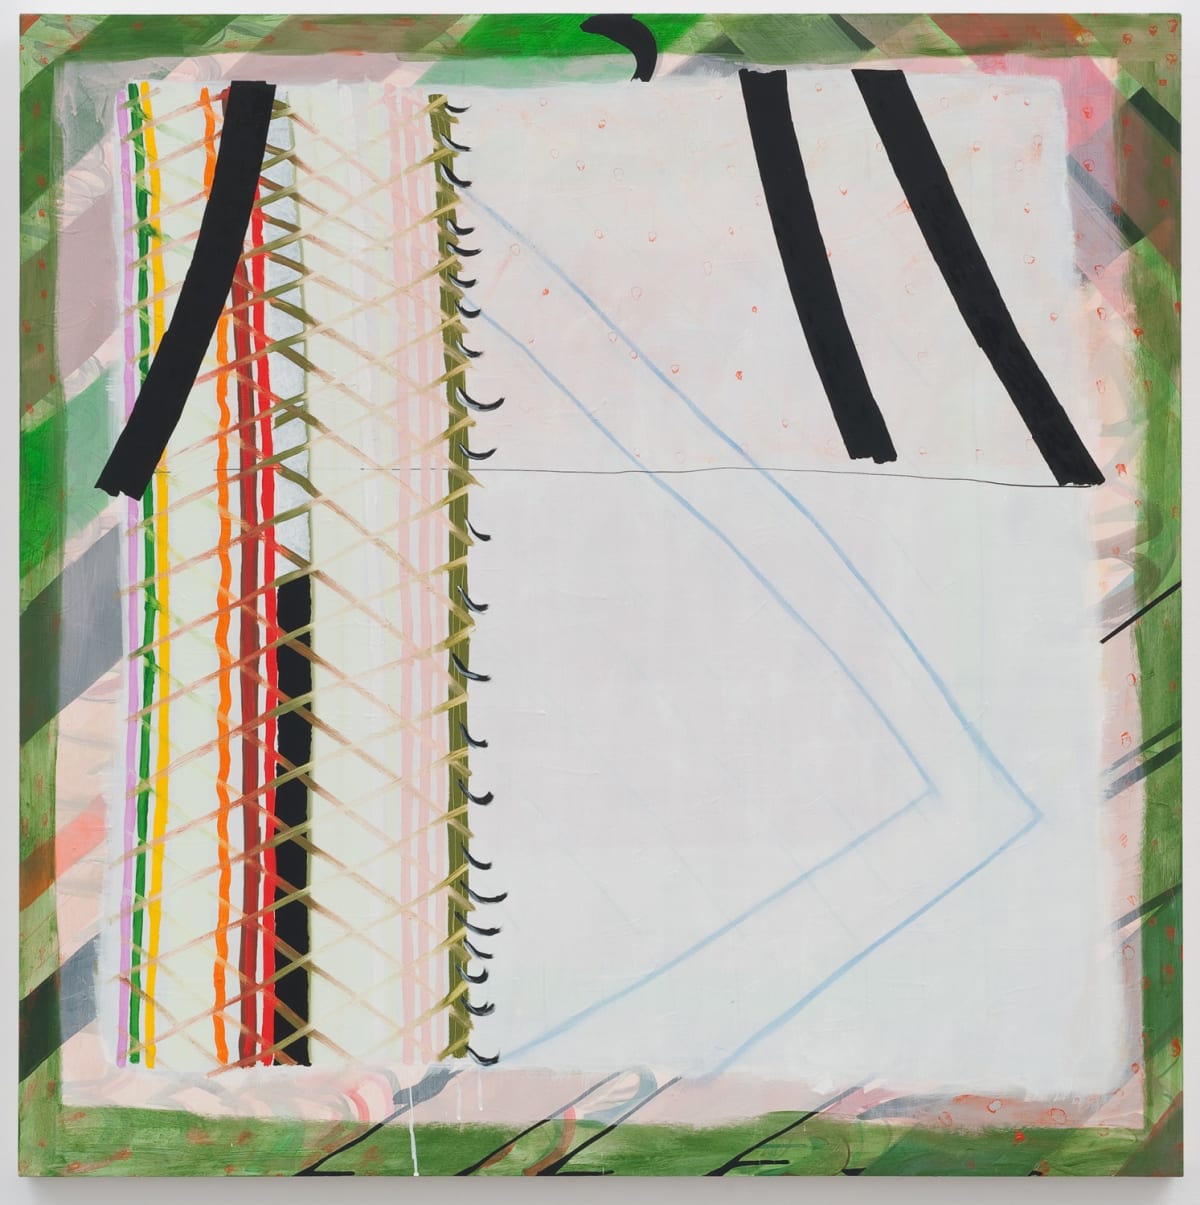 Abstract linear painting, multi-colored vertical lines in foreground on white square, diagonal lines in background